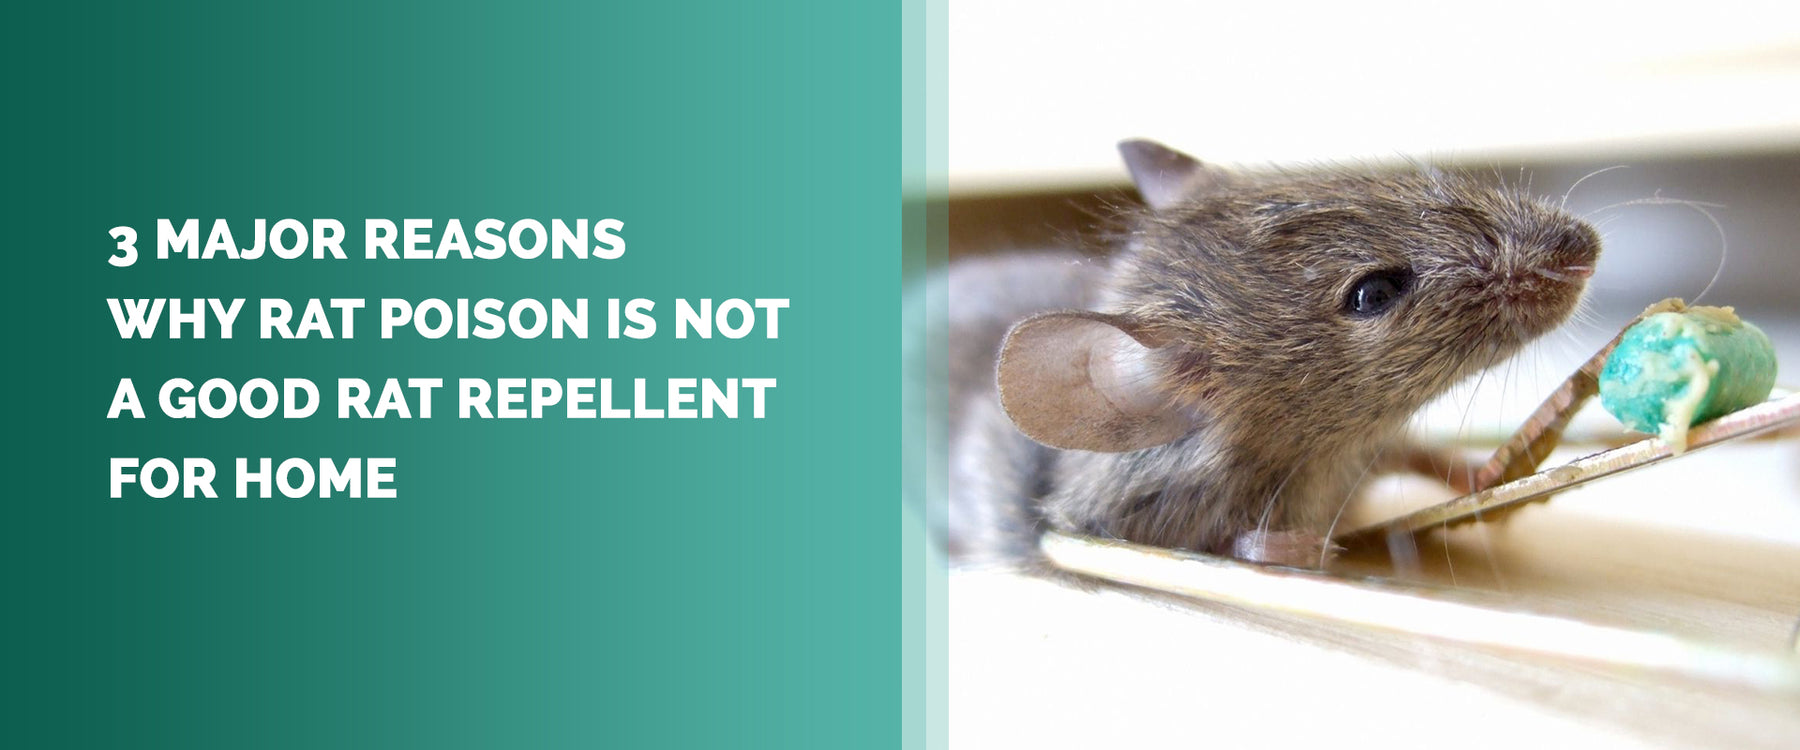 Major Reasons Why Rat Poison Is Not A Good Rat Repellent For Home